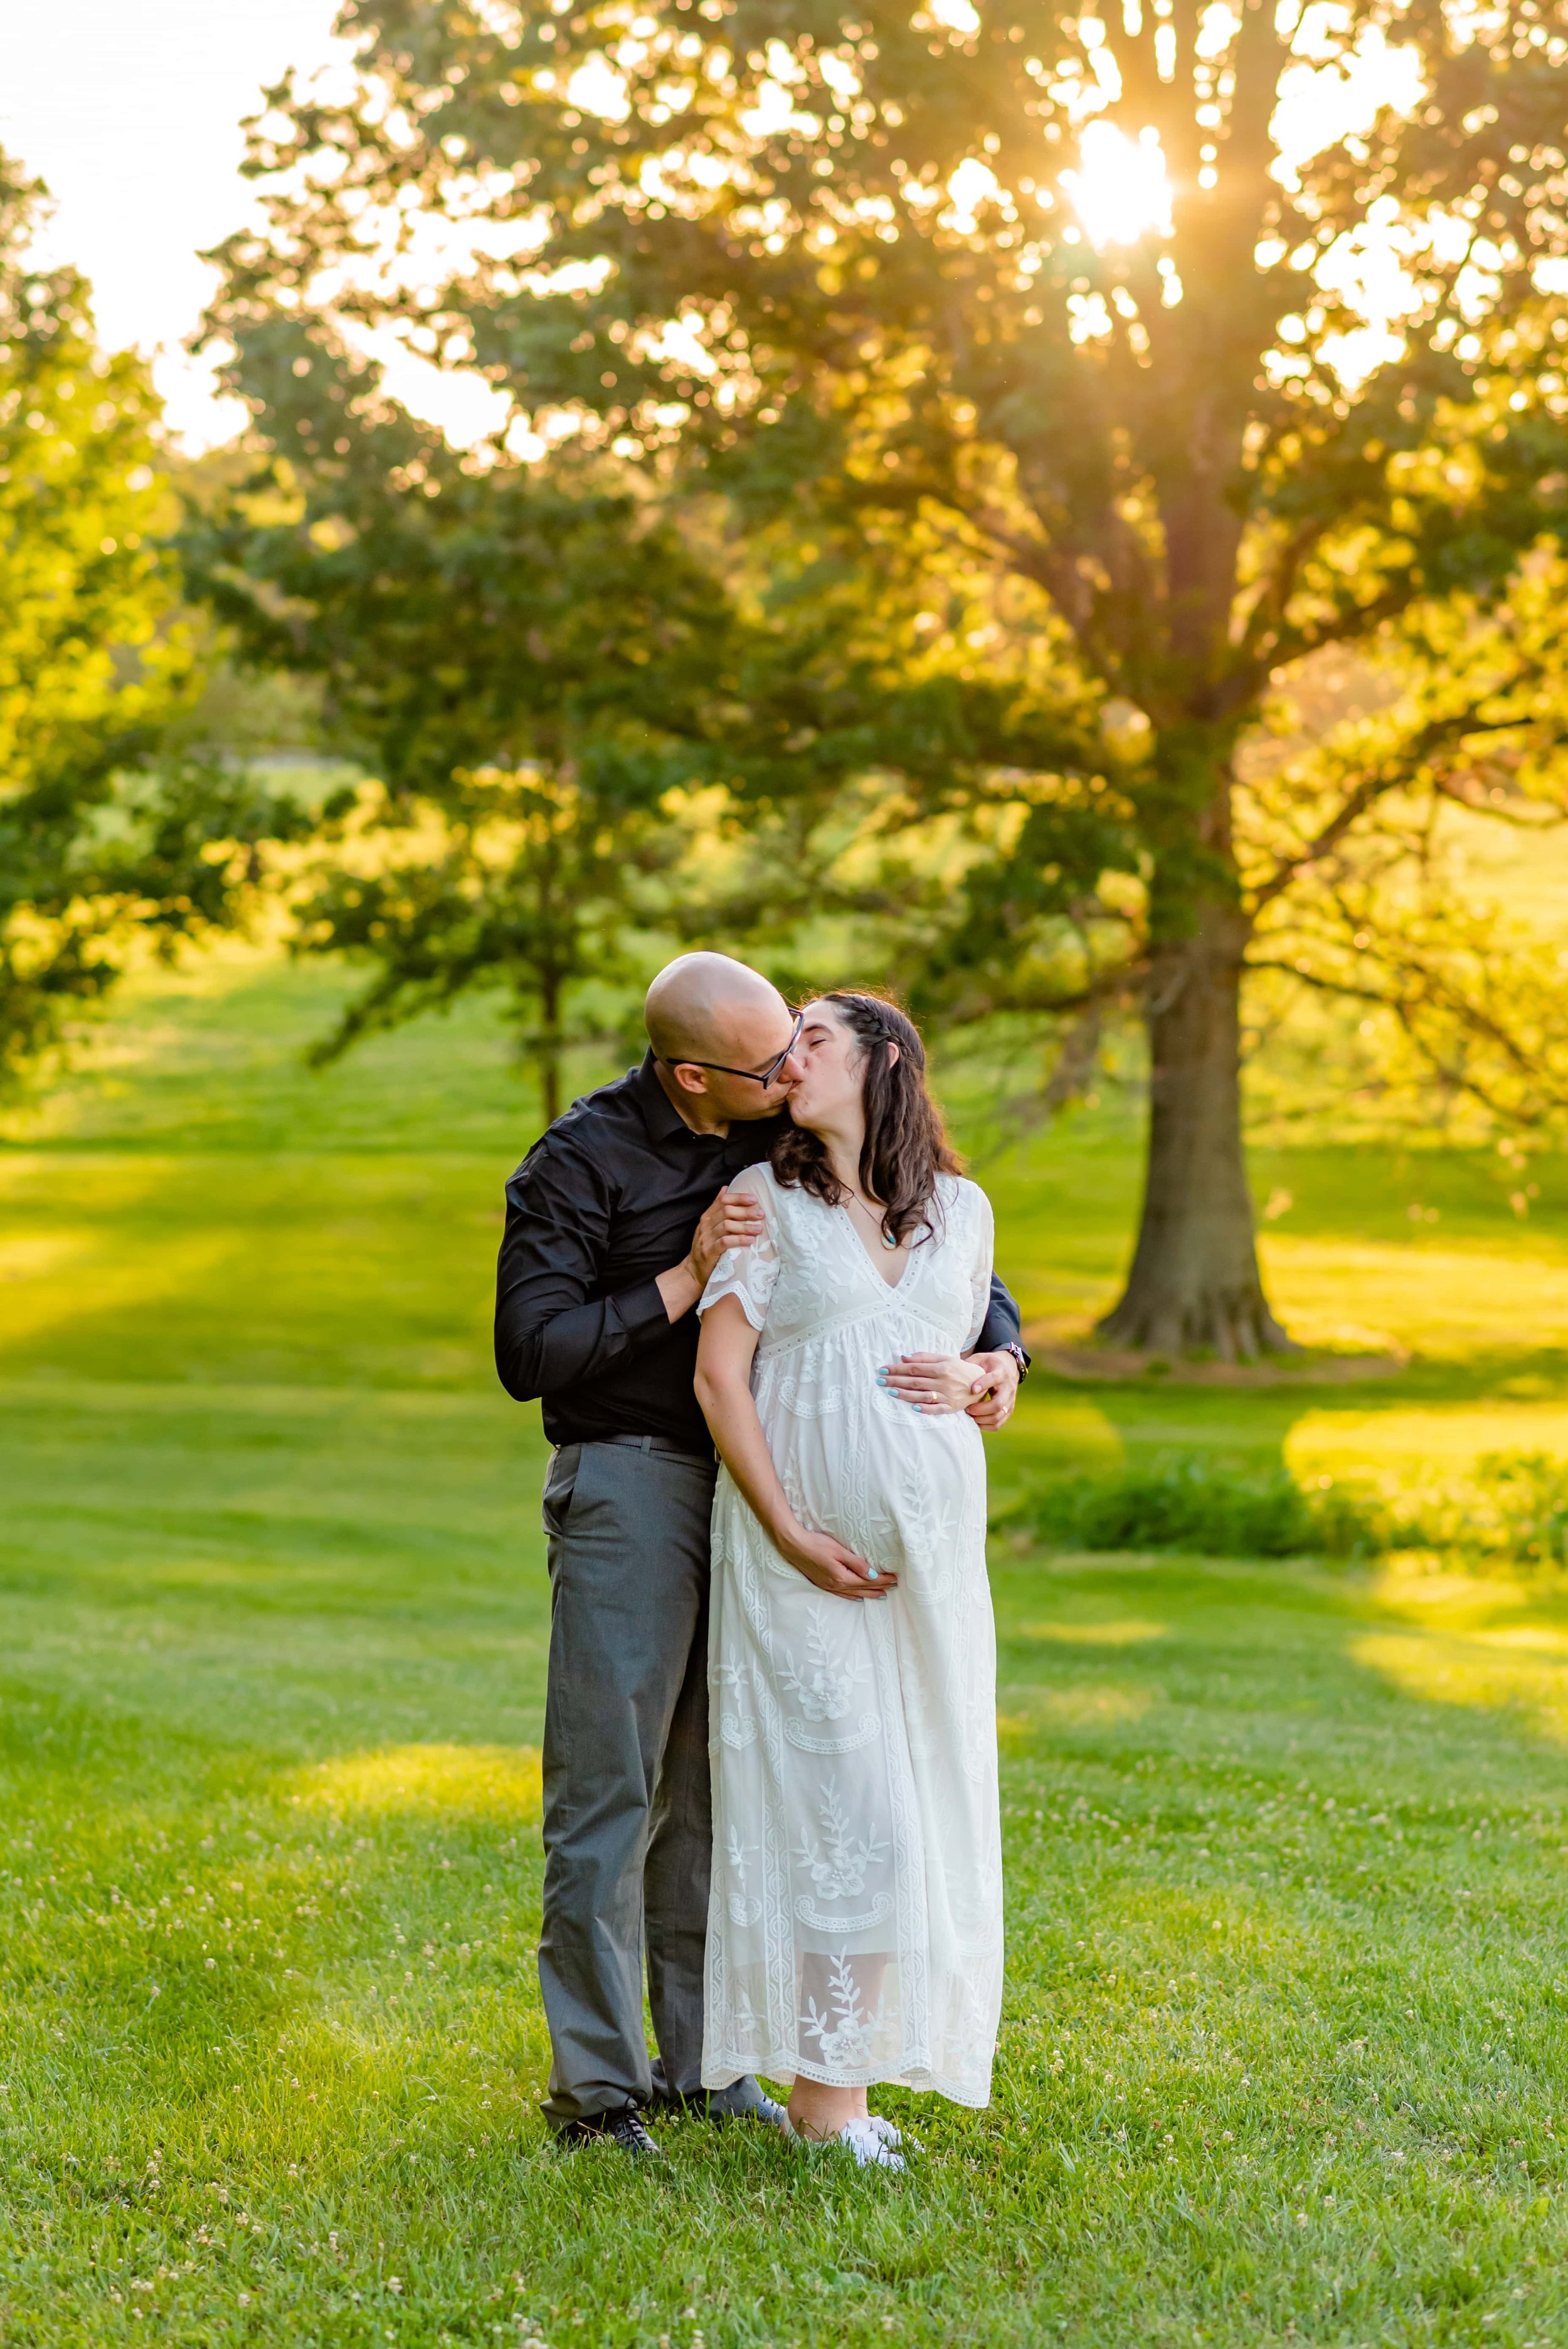 Maryland Maternity couples photo of man and woman standing in a field kissing